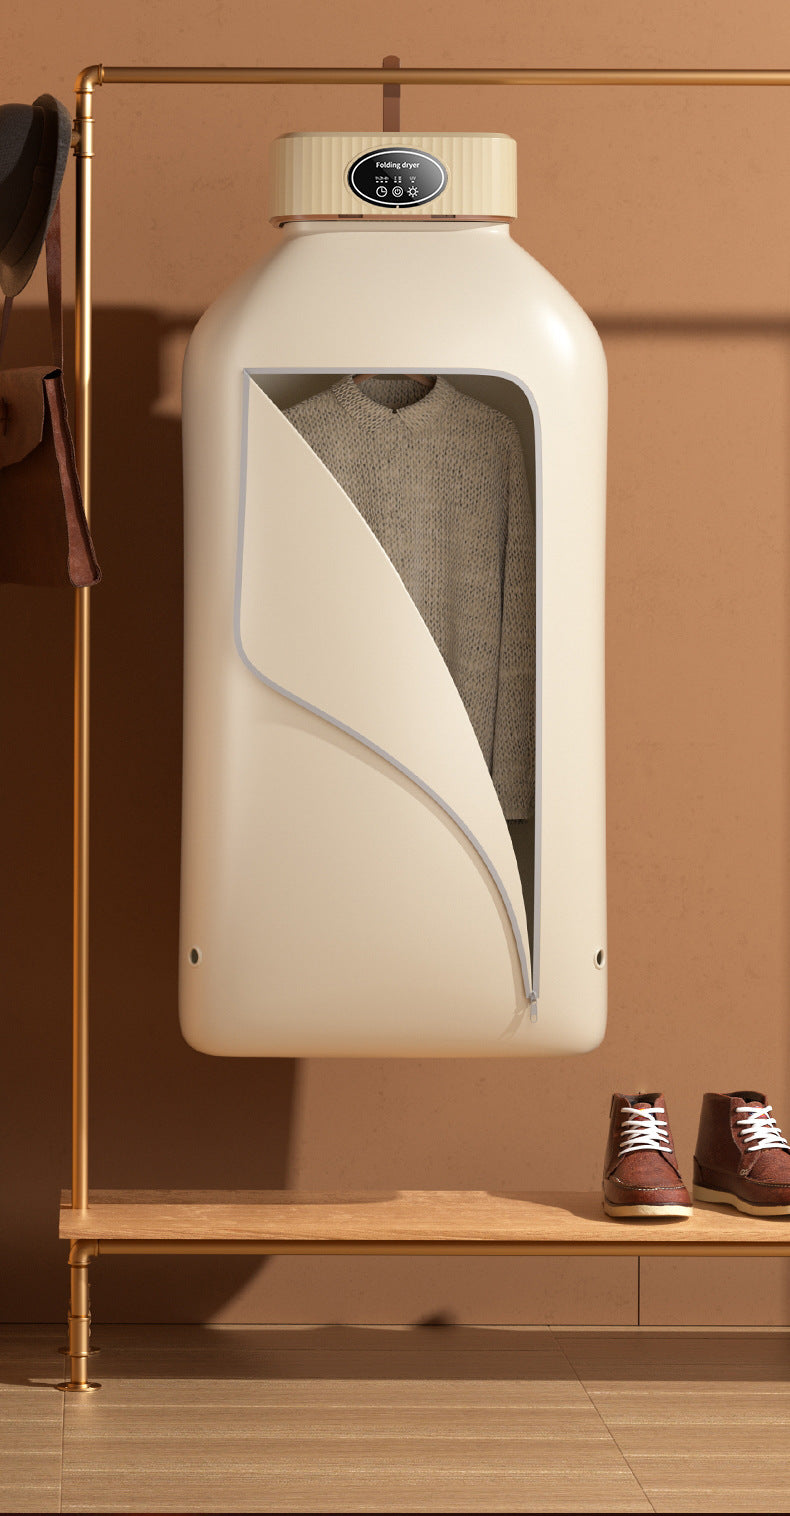 A compact dryer for quick and efficient drying on the go